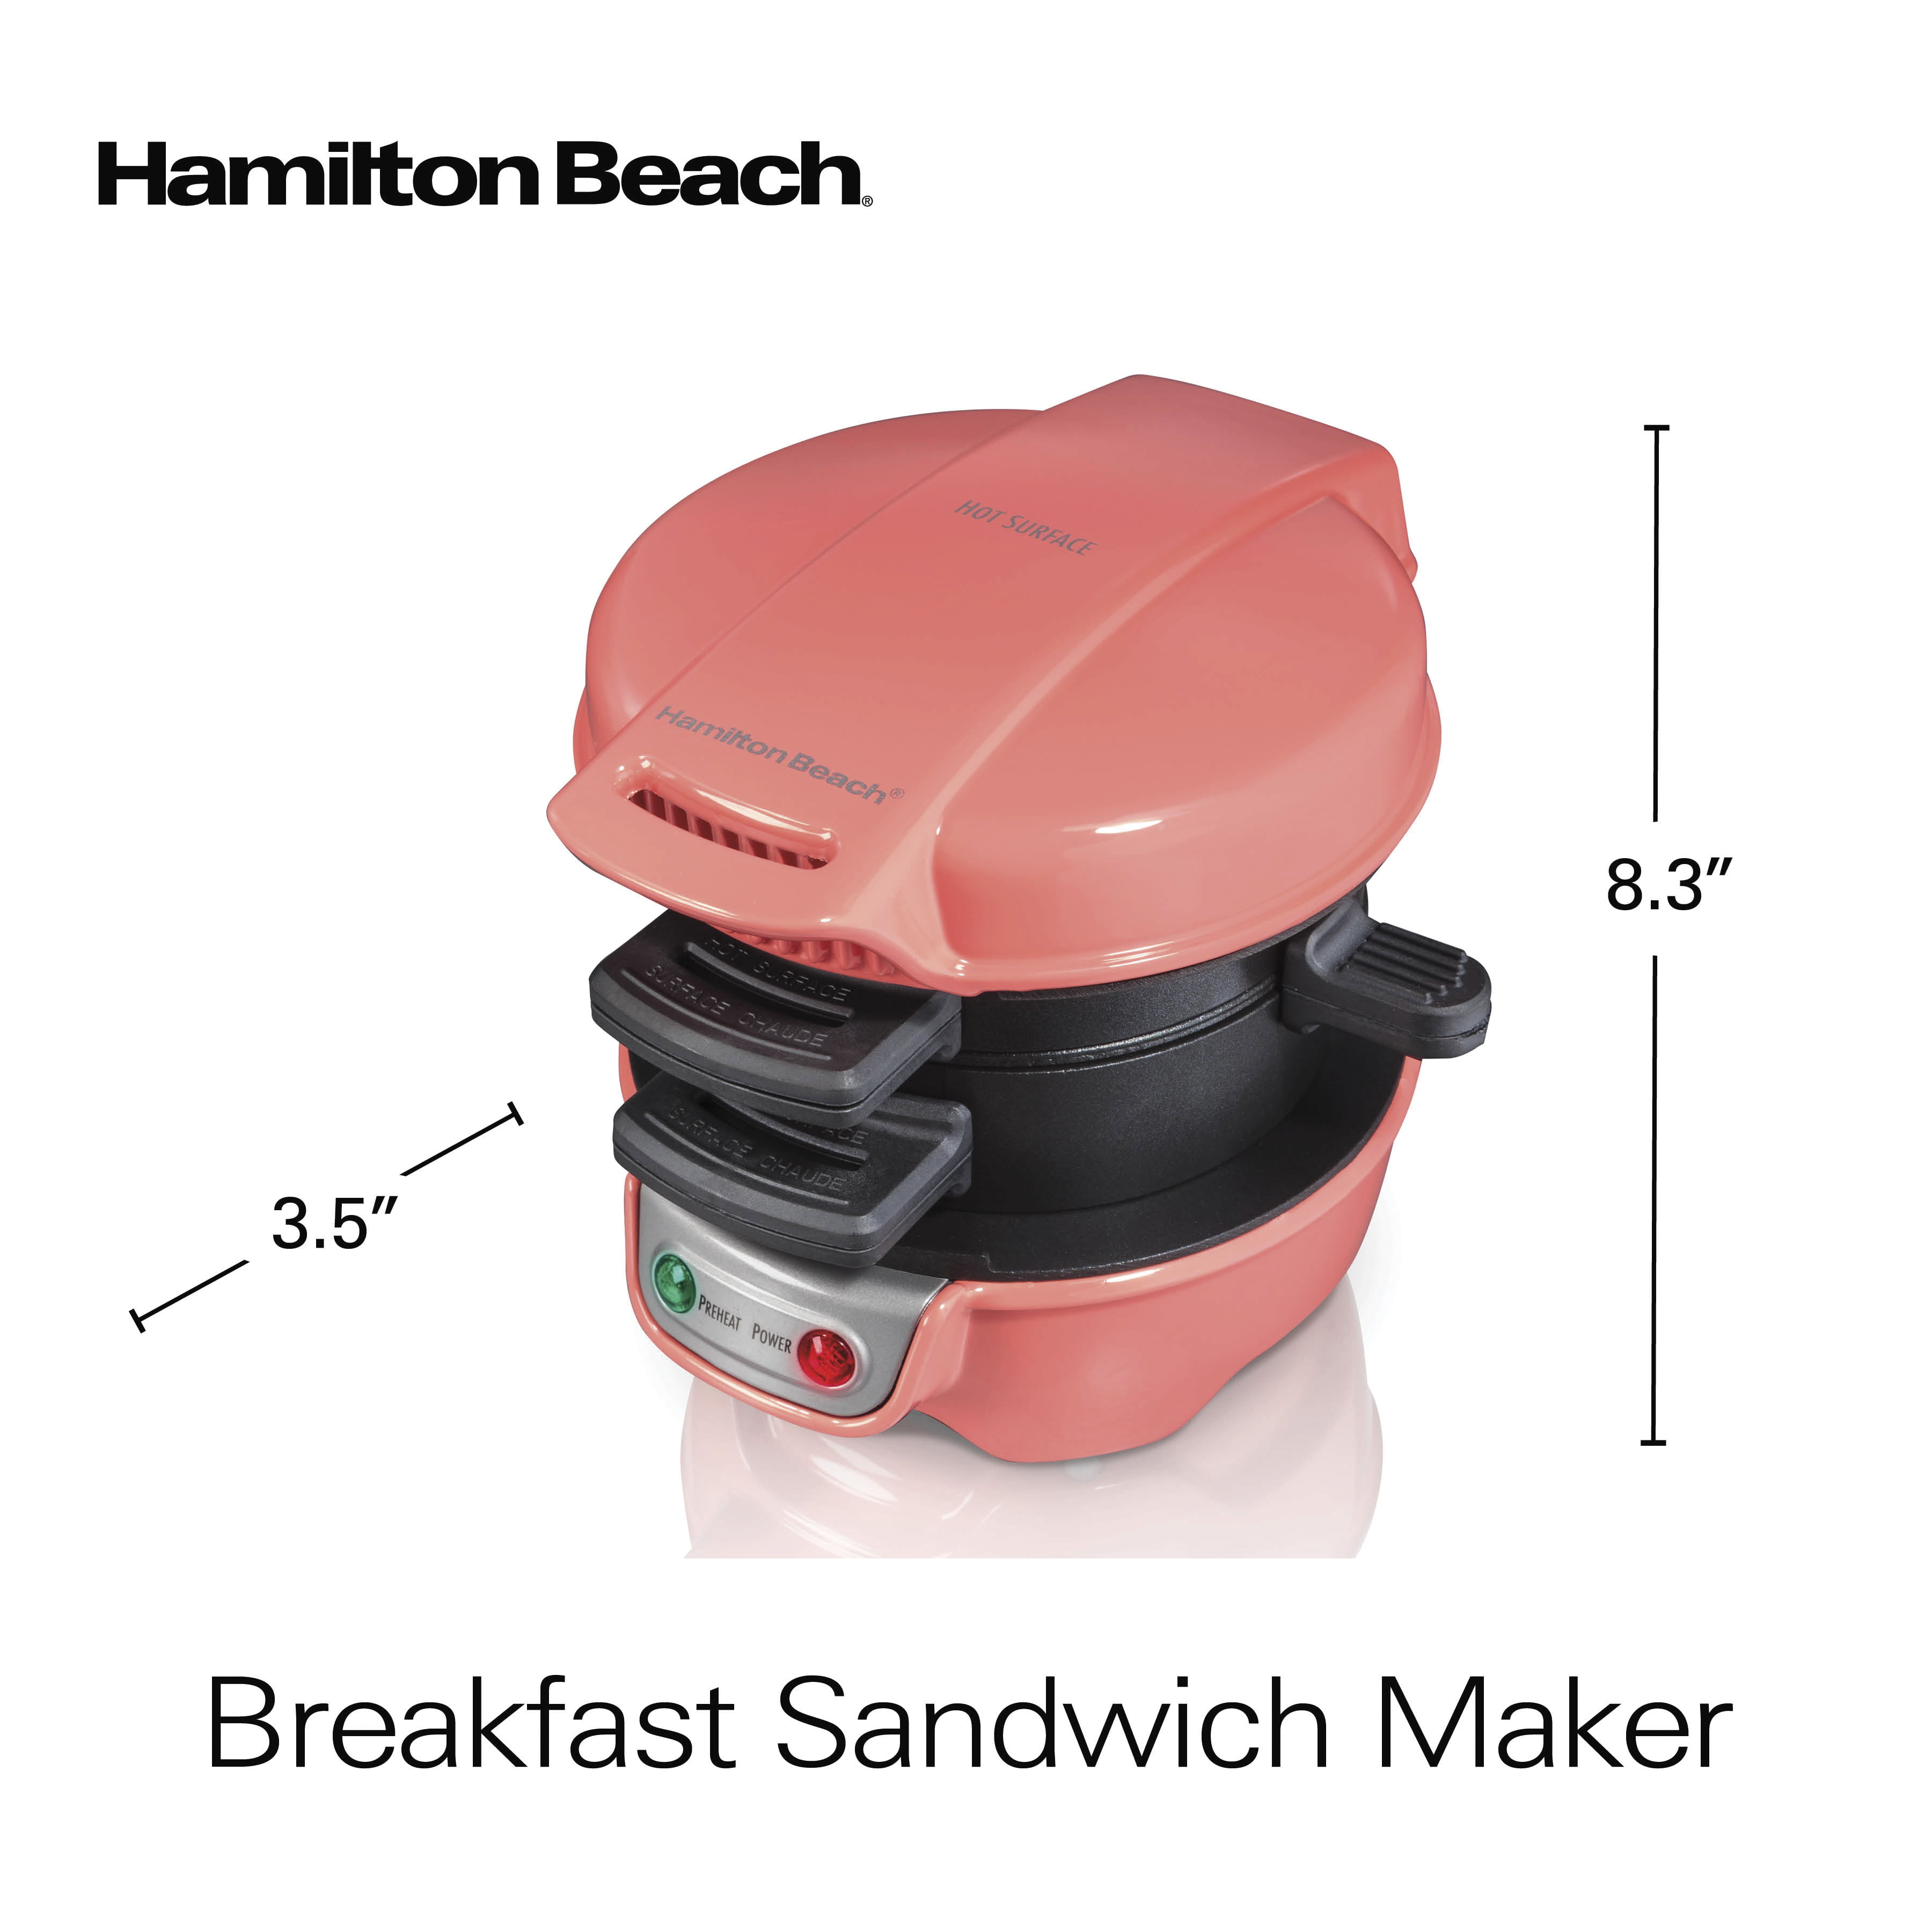  Hamilton Beach Breakfast Sandwich Maker with Egg Cooker Ring,  Customize Ingredients, Perfect for English Muffins, Croissants, Mini  Waffles, Single & Dual Breakfast Sandwich Maker, Silver: Home & Kitchen